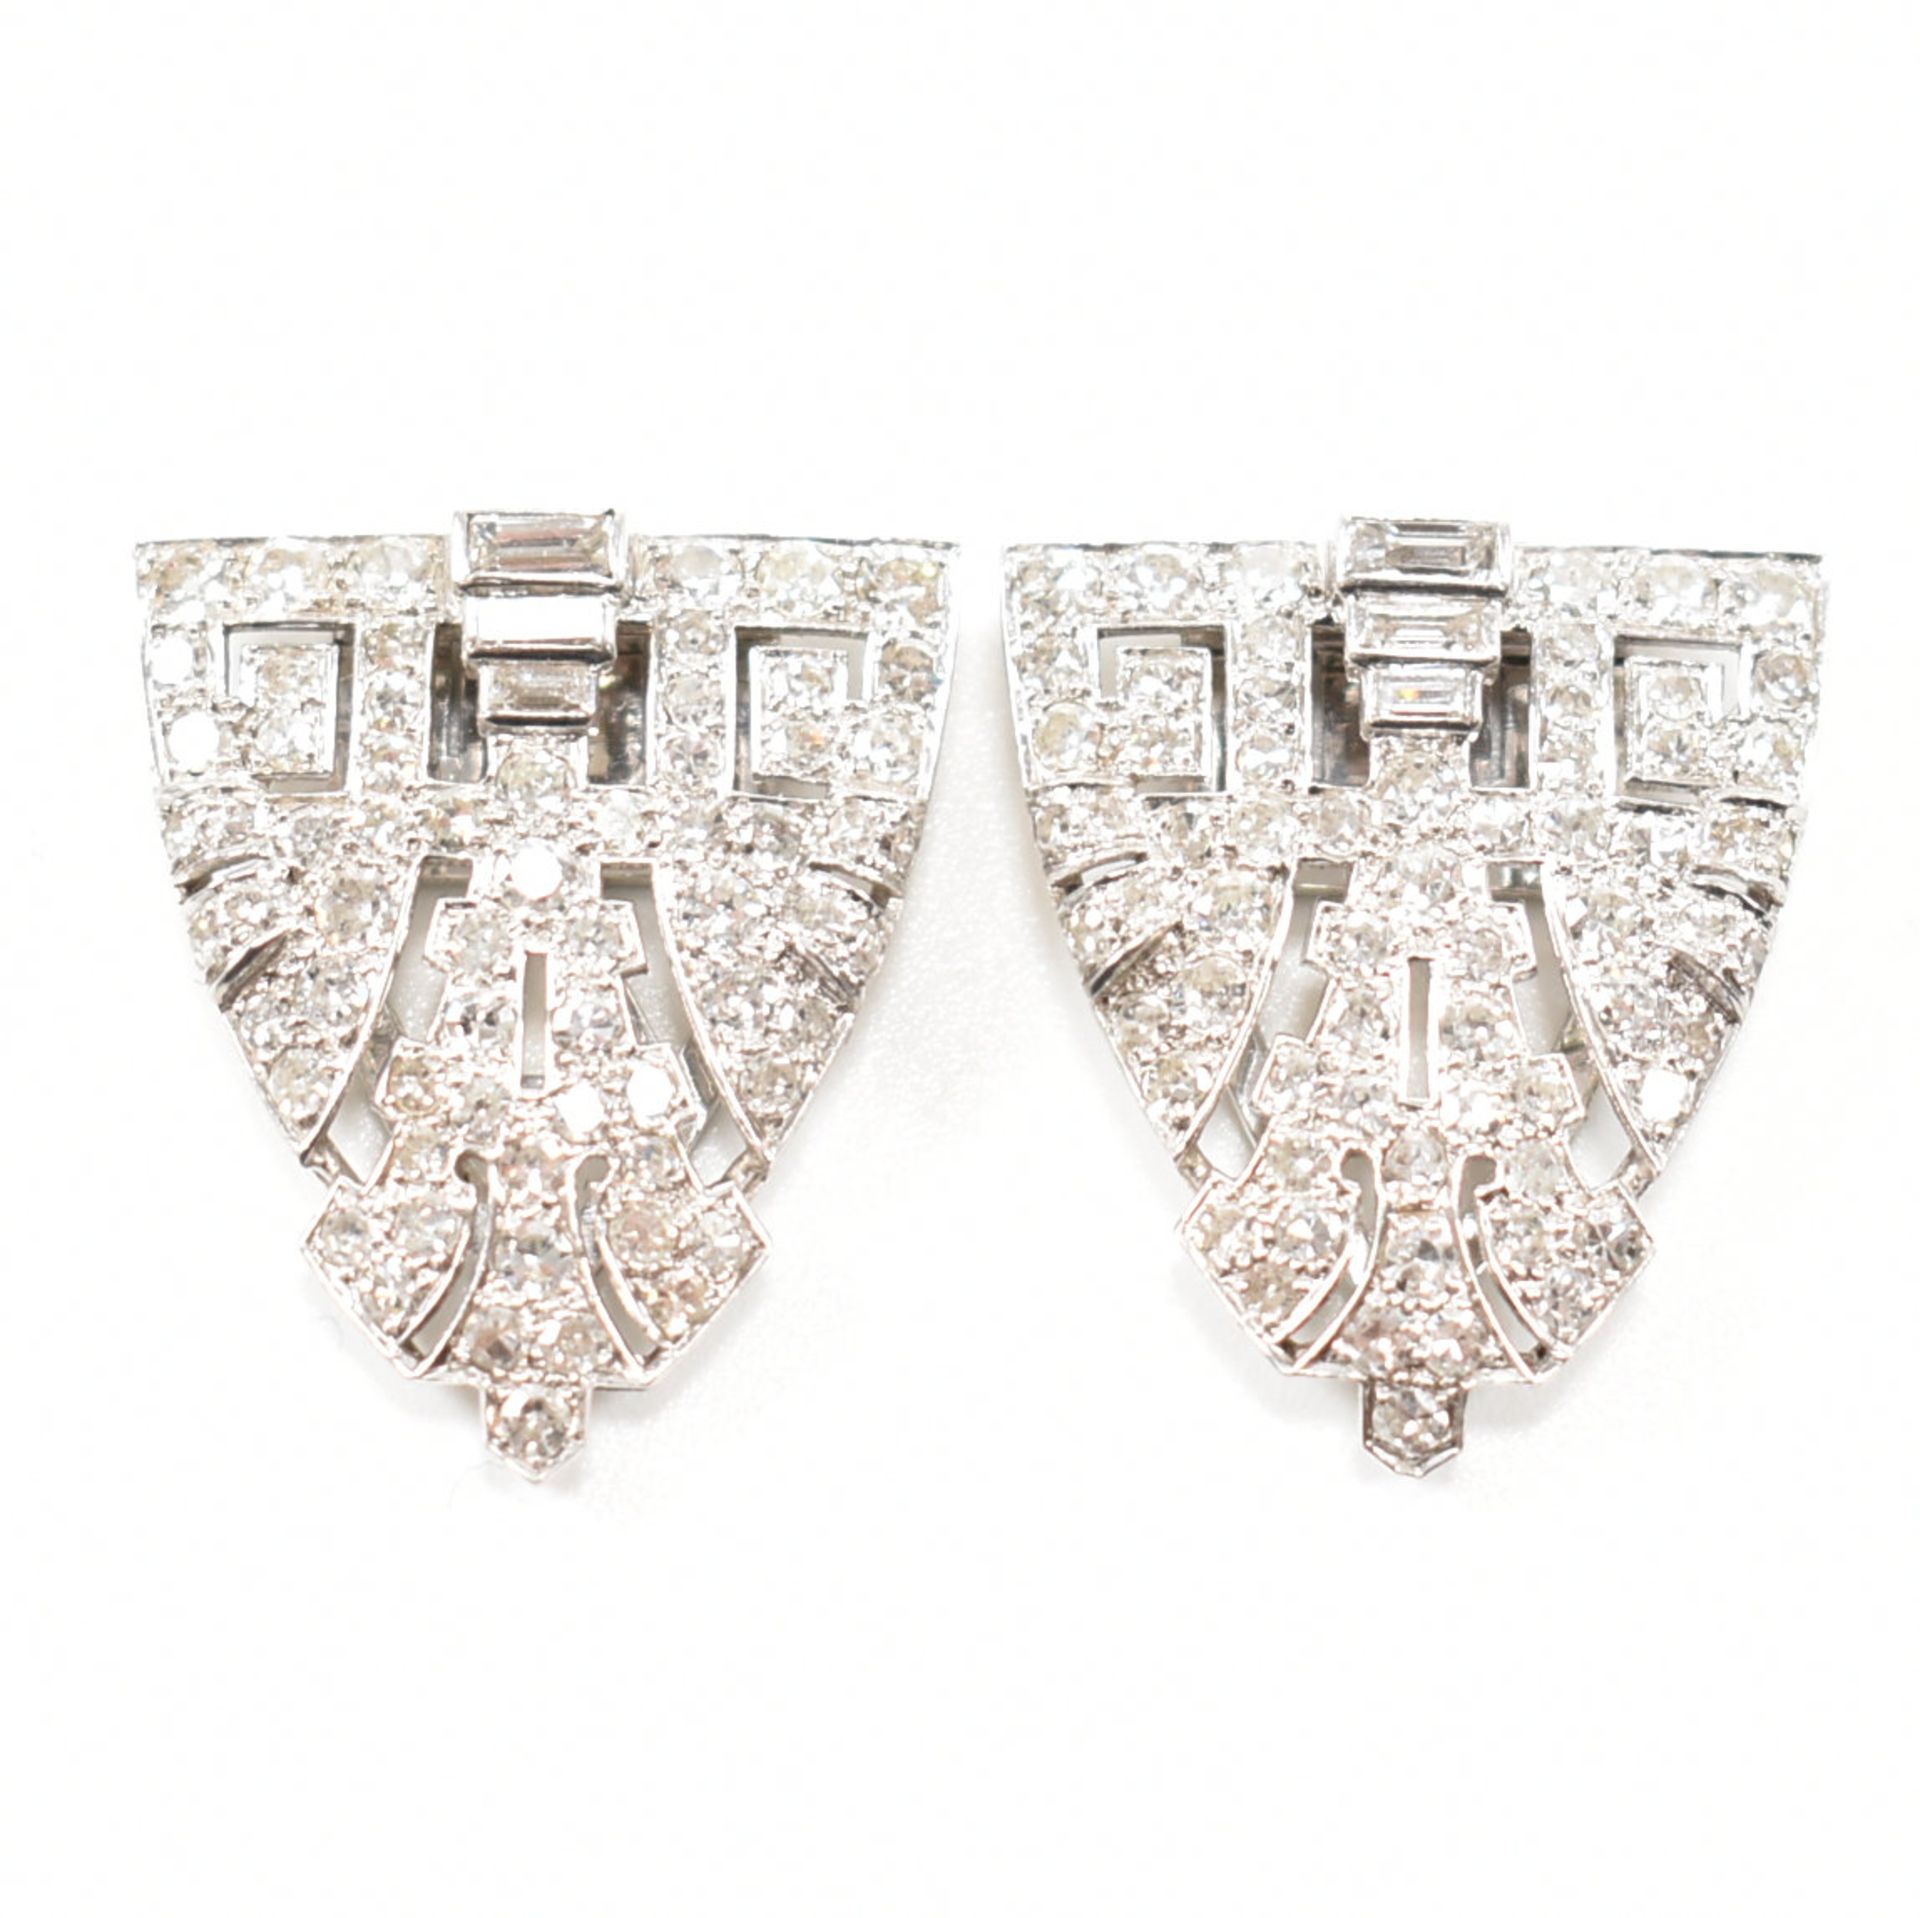 MAPPIN & WEBB - PAIR OF ART DECO DIAMOND DOUBLE DRESS CLIPS - Image 9 of 10